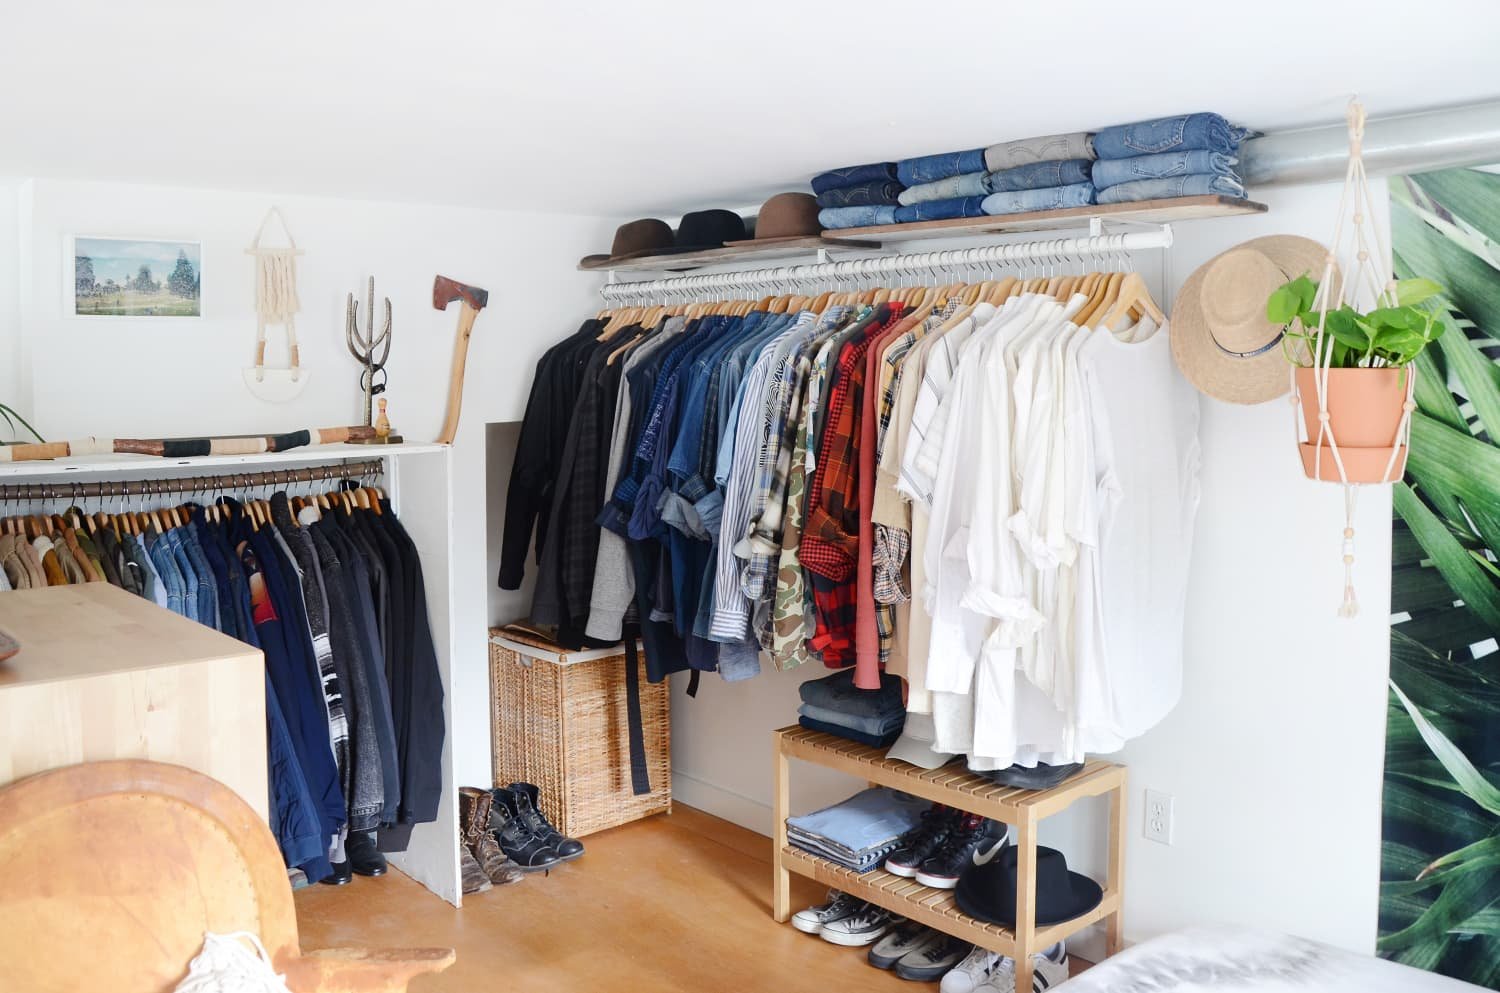 Decluttering Is Hard—But There’s One 2-Minute Way to Make it Easier